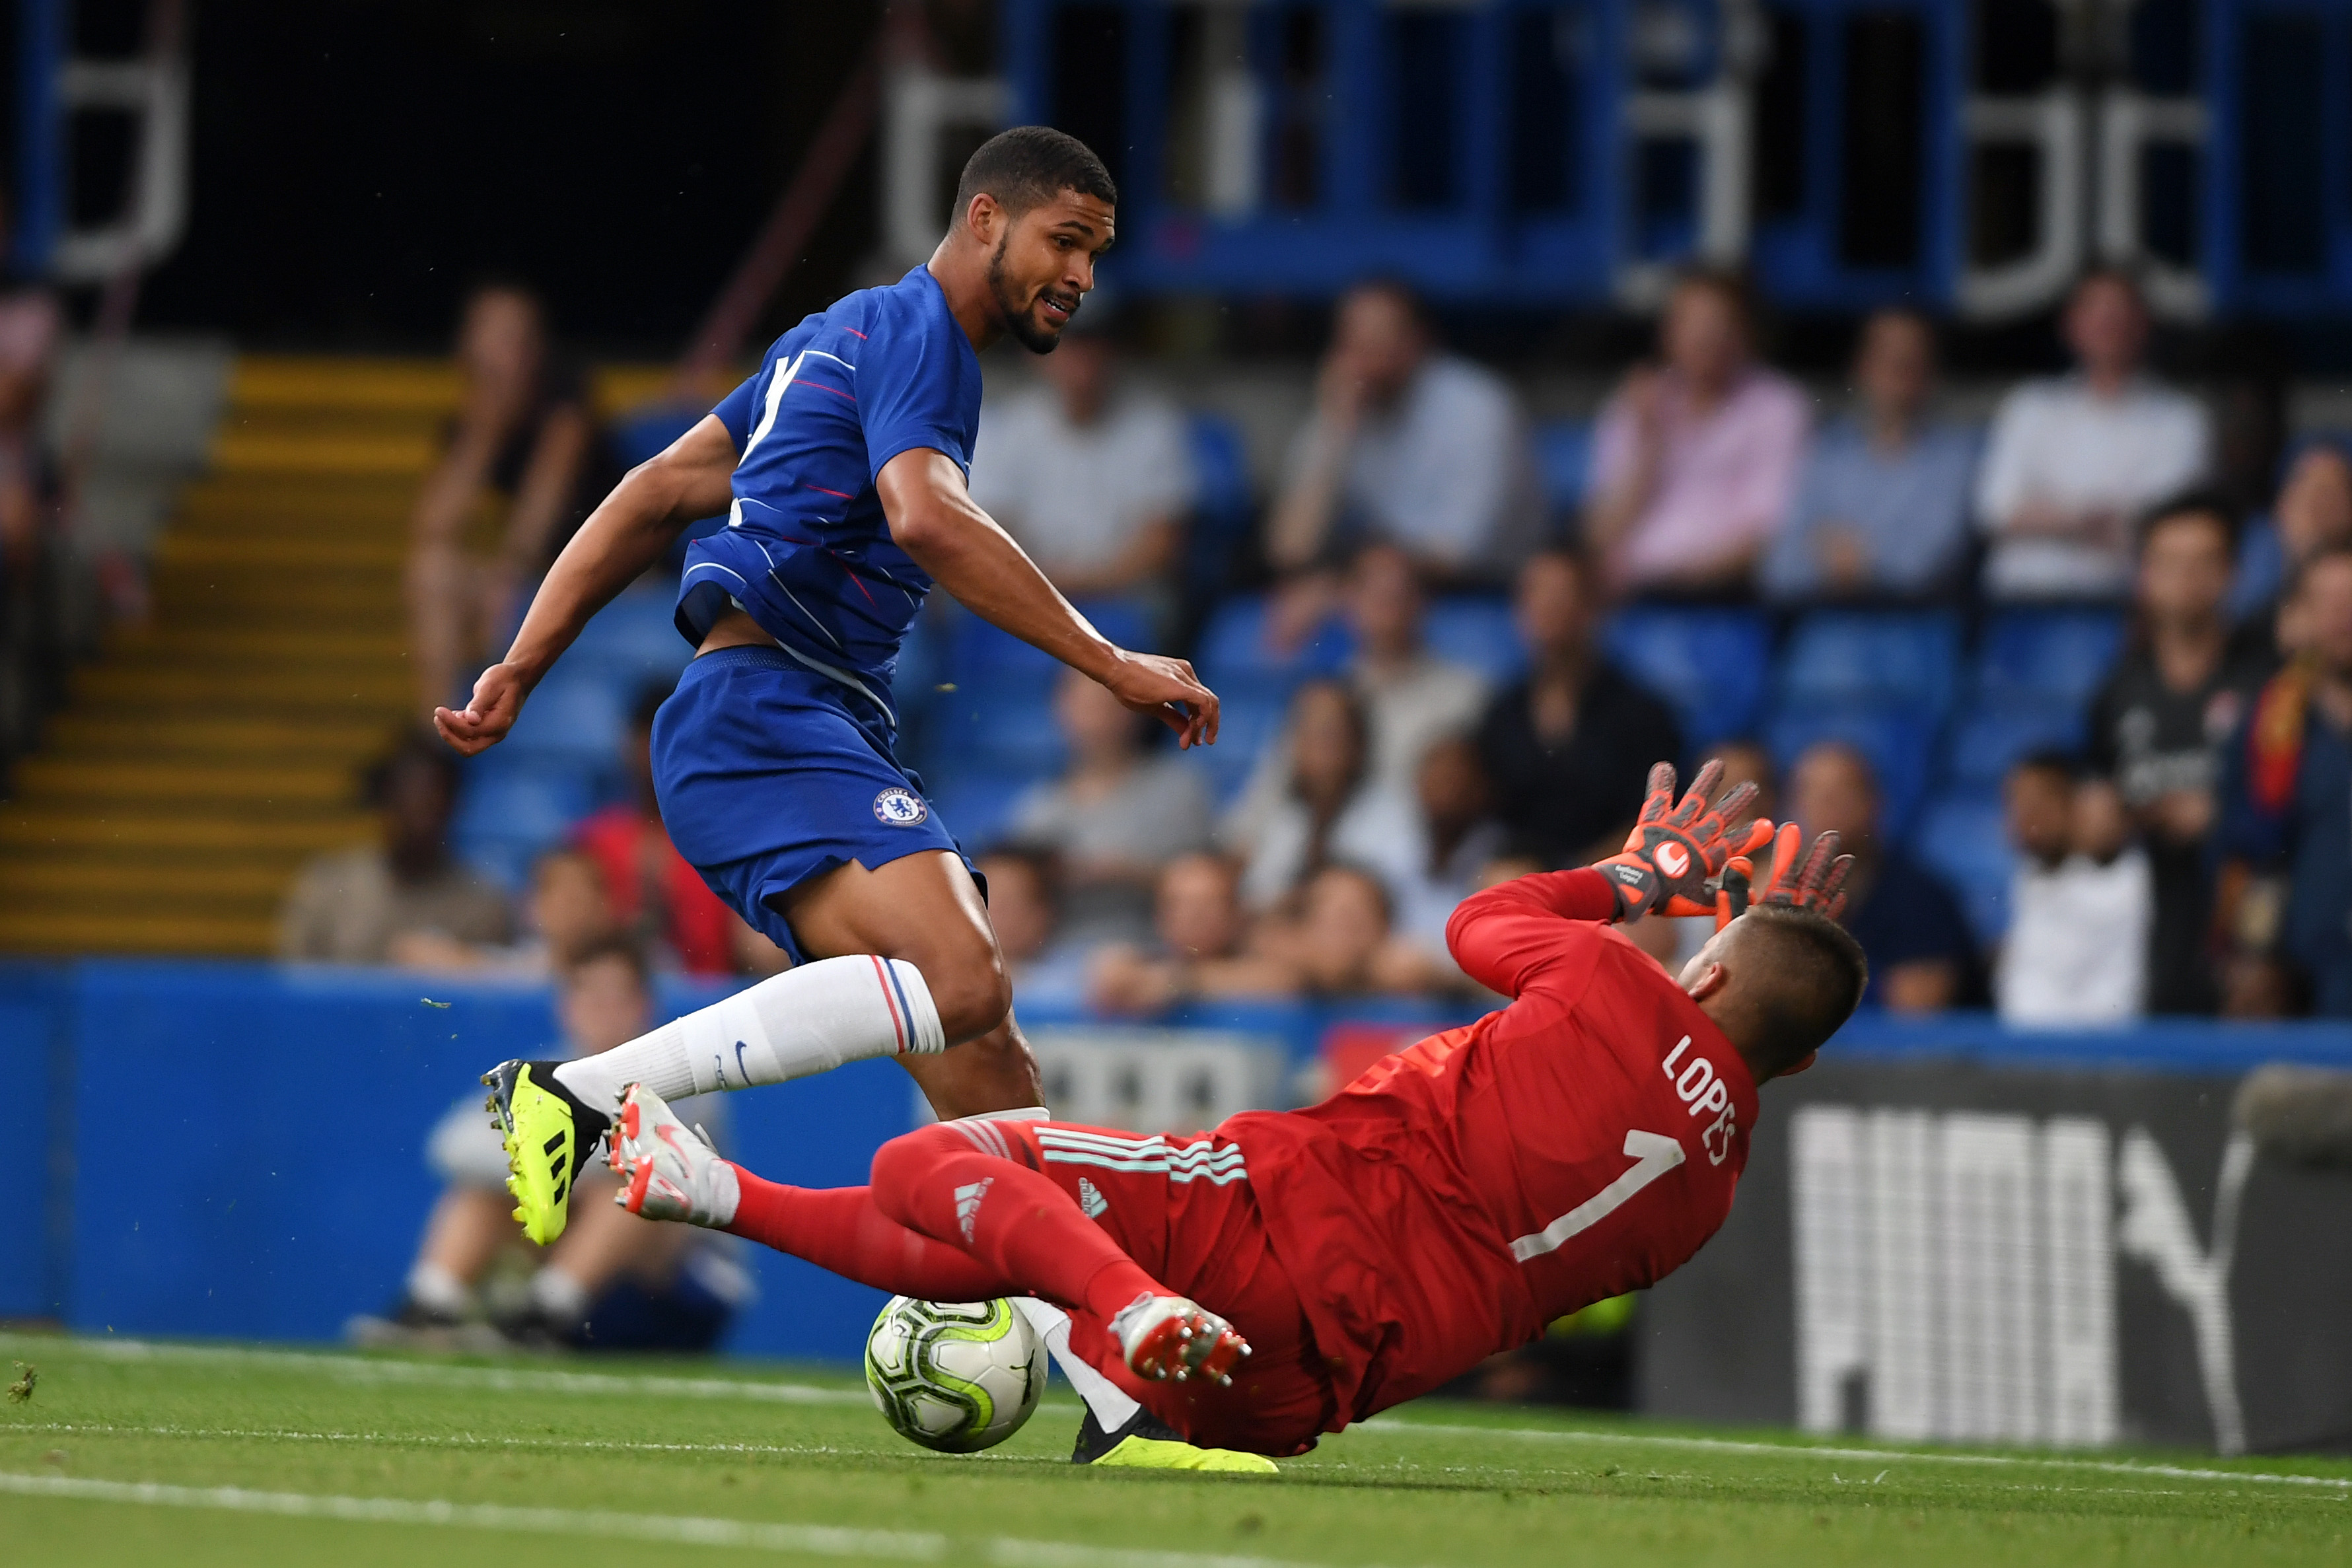 LONDON, ENGLAND - AUGUST 07: Anthony Lopes of Lyon saves a shot from Ruben Loftus-Cheek of Chelsea during the pre-season friendly match between Chelsea and Lyon at Stamford Bridge on August 7, 2018 in London, England.  (Photo by Mike Hewitt/Getty Images)